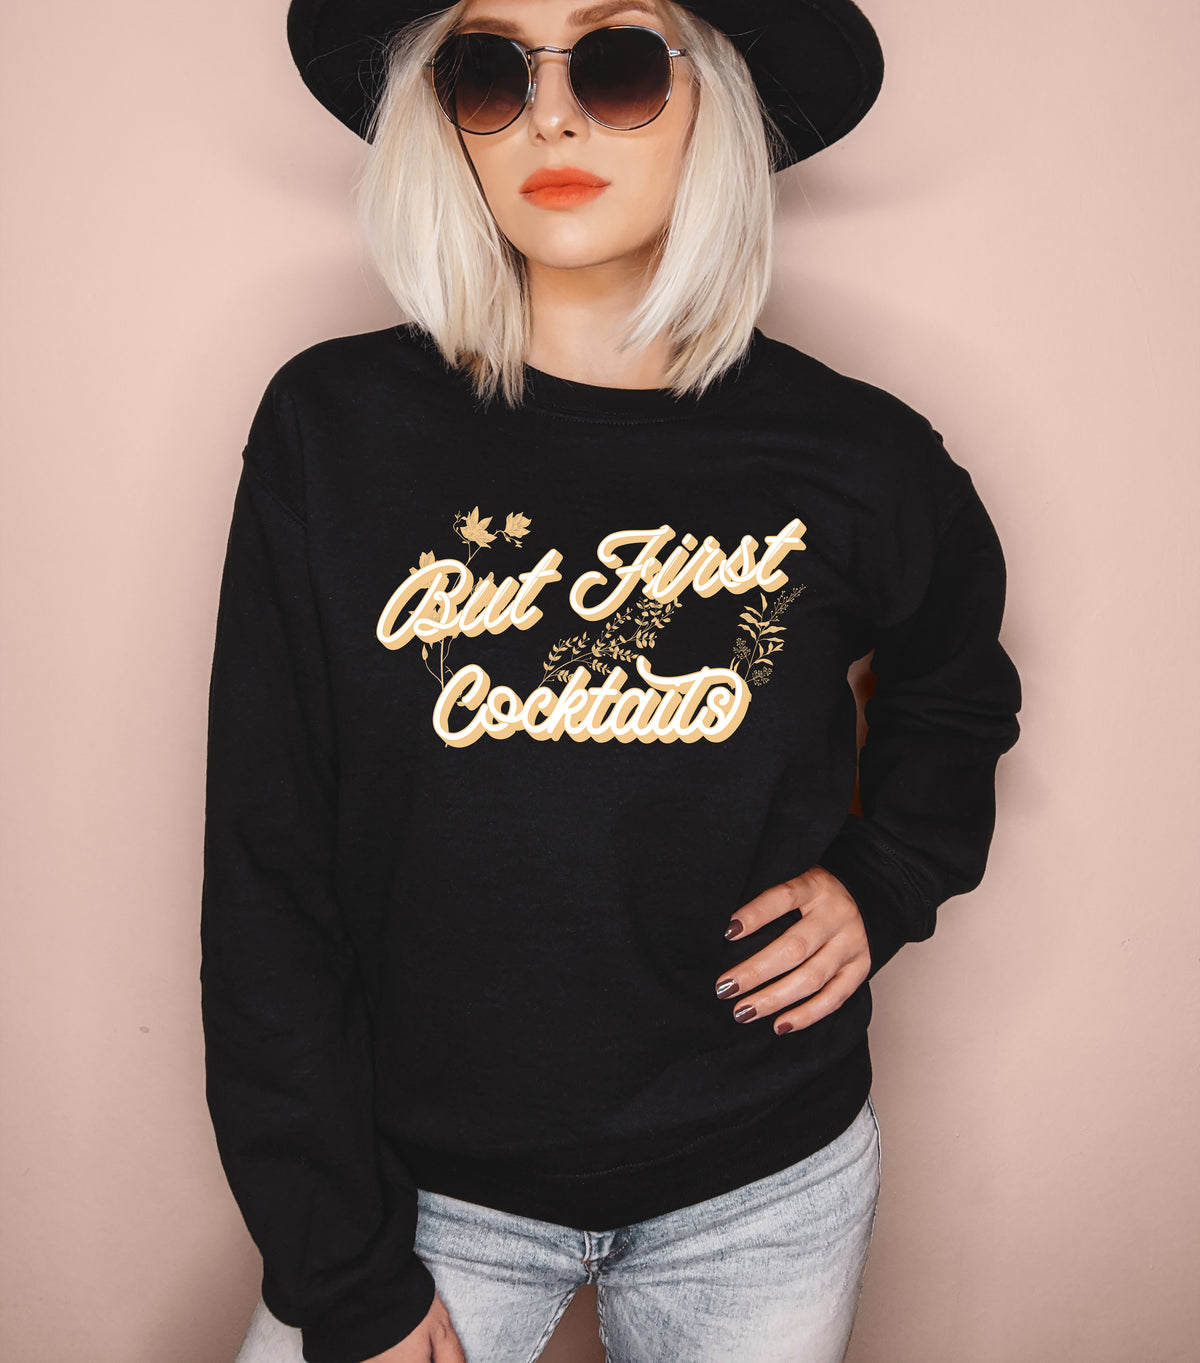 Black sweatshirt that says but first cocktails - HighCIit